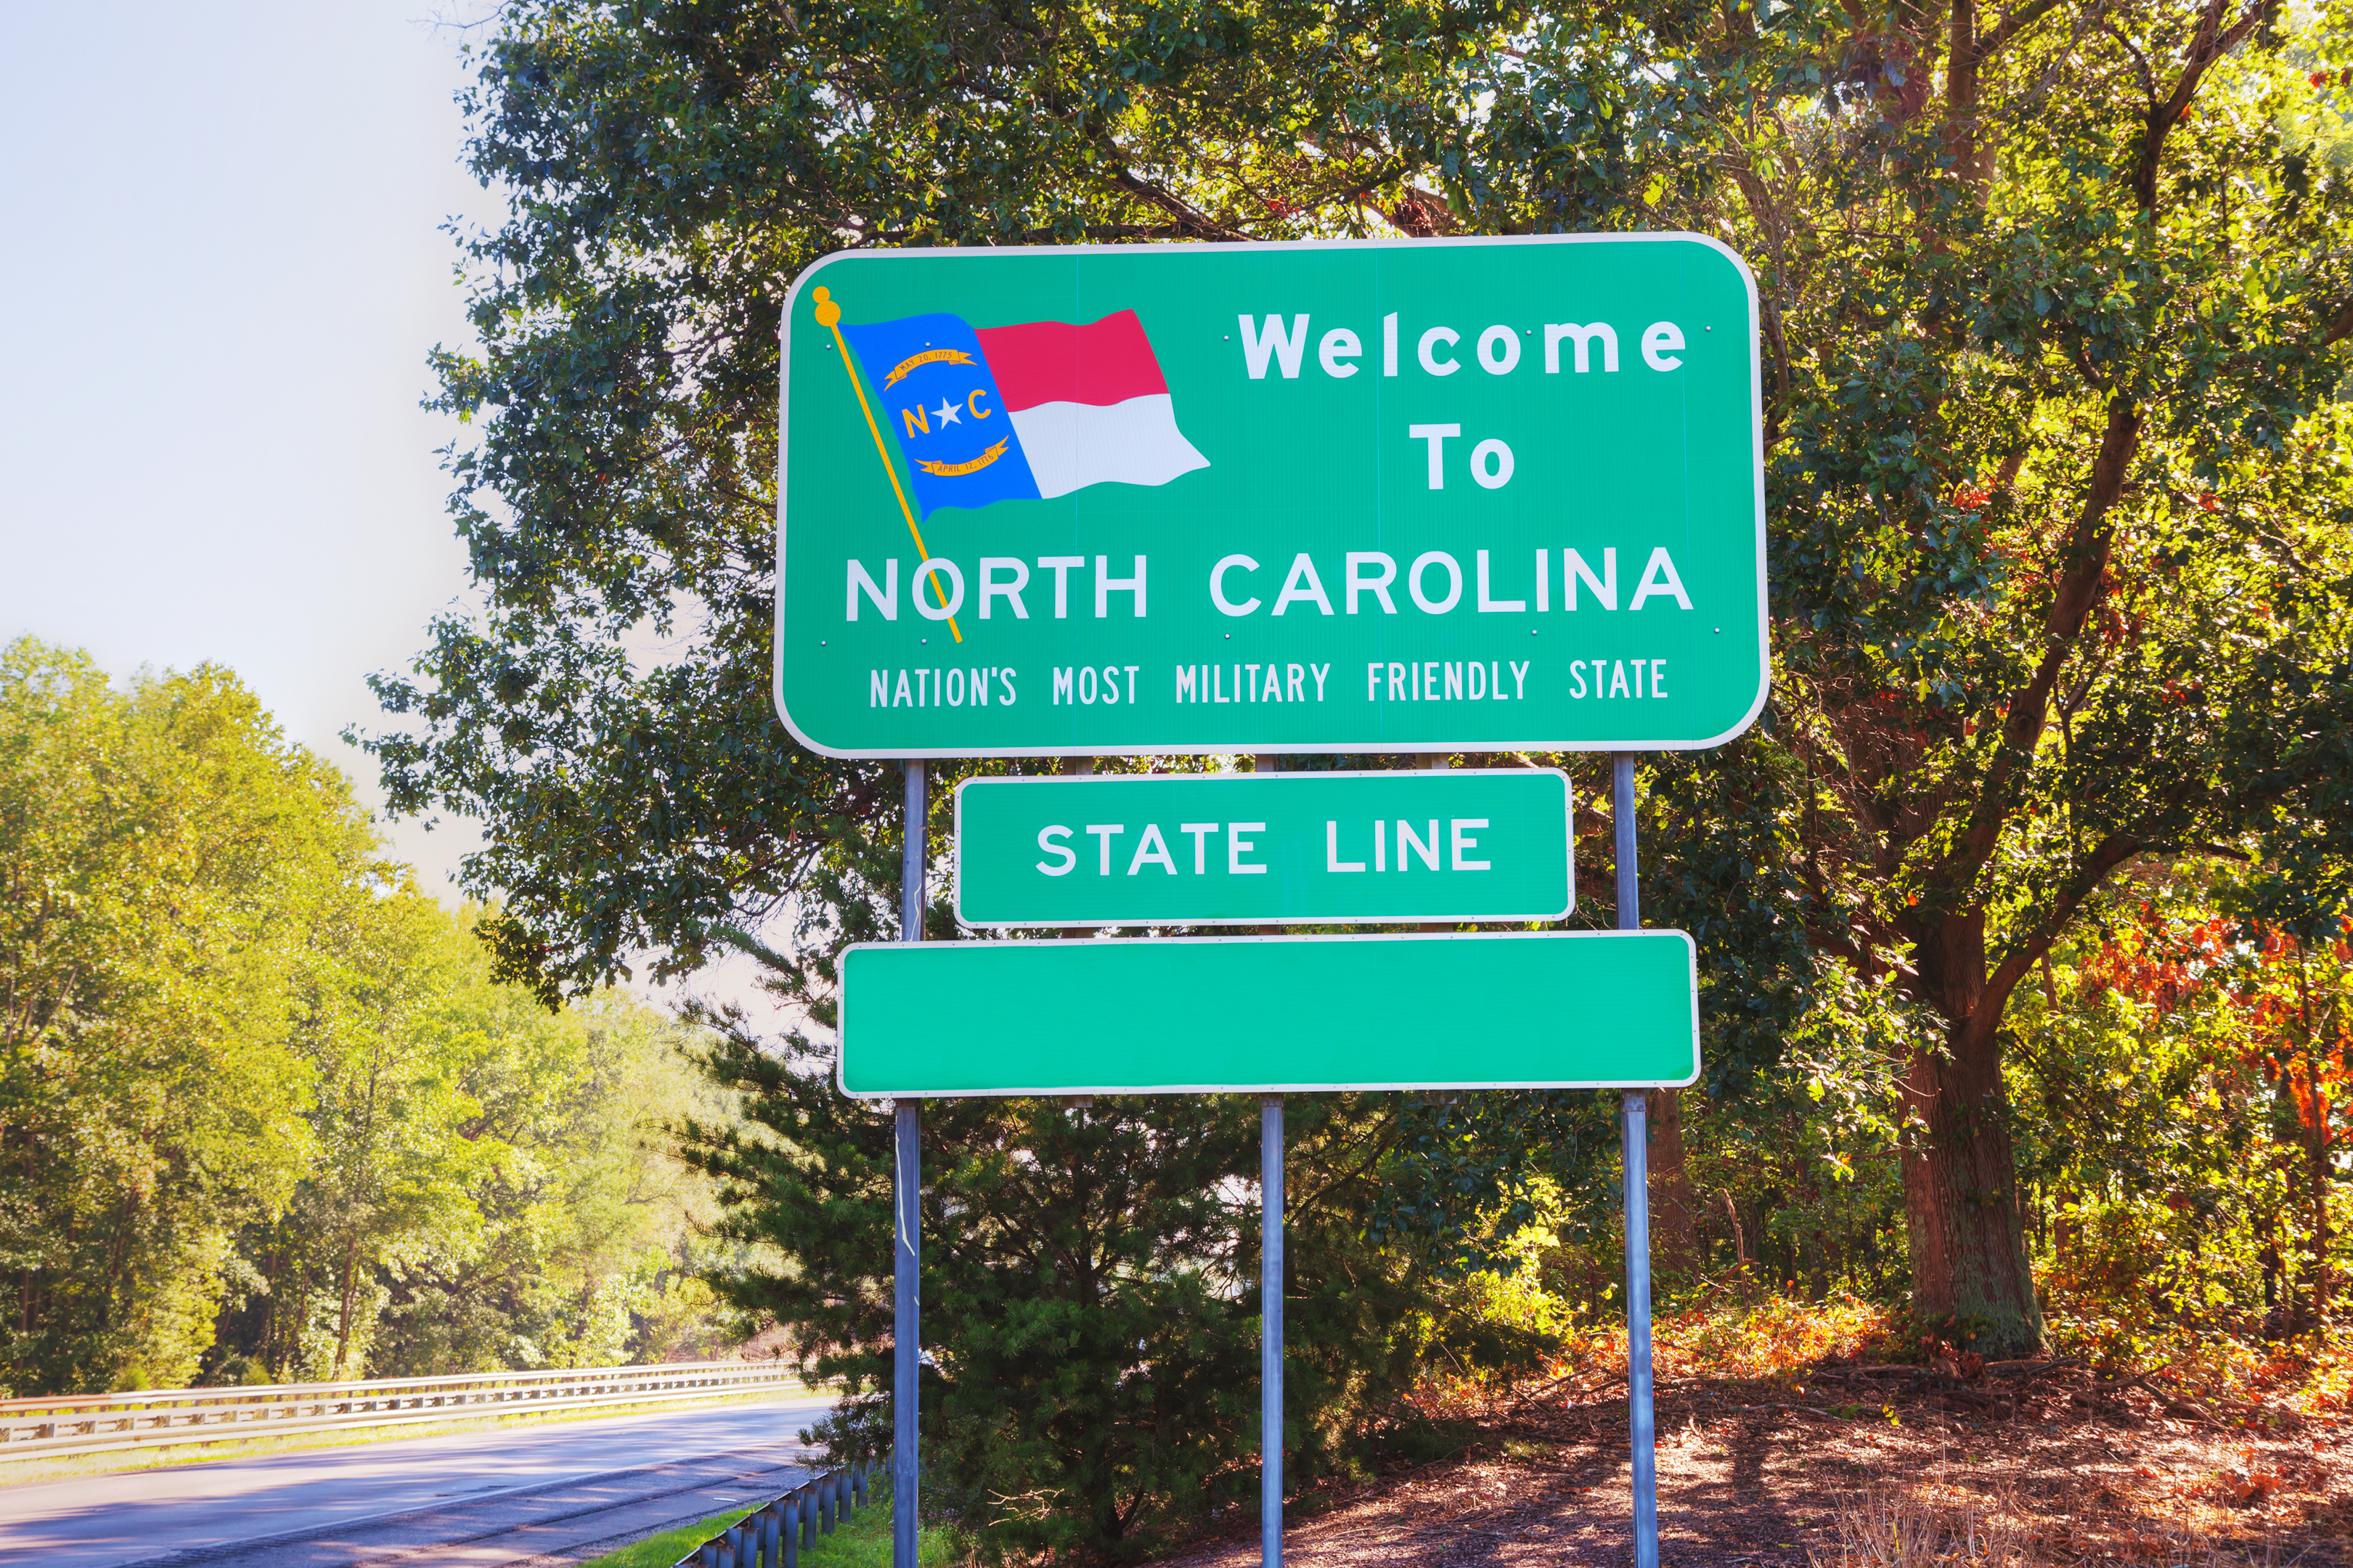 A road trip from Florida to N. Carolina